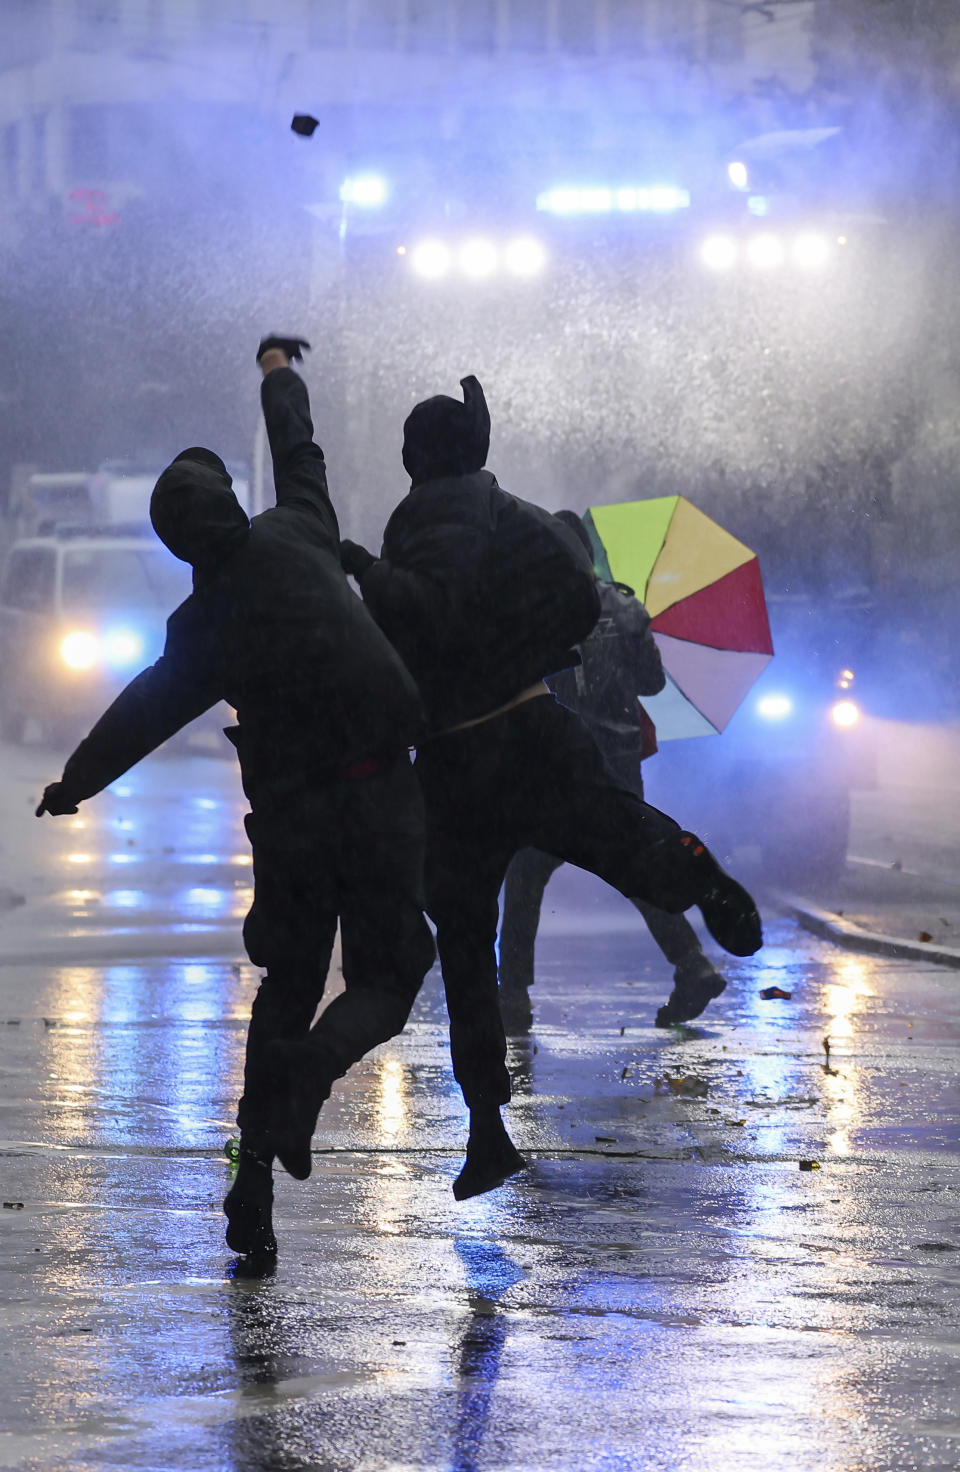 Left-wing demonstrators throw stones at a water cannon during riots in Leipzig, Germany, Saturday, Sept. 18, 2021. The campaign alliance "We are all Linx" had mobilized nationwide for the demonstration. (Jan Woitas/dpa via AP)